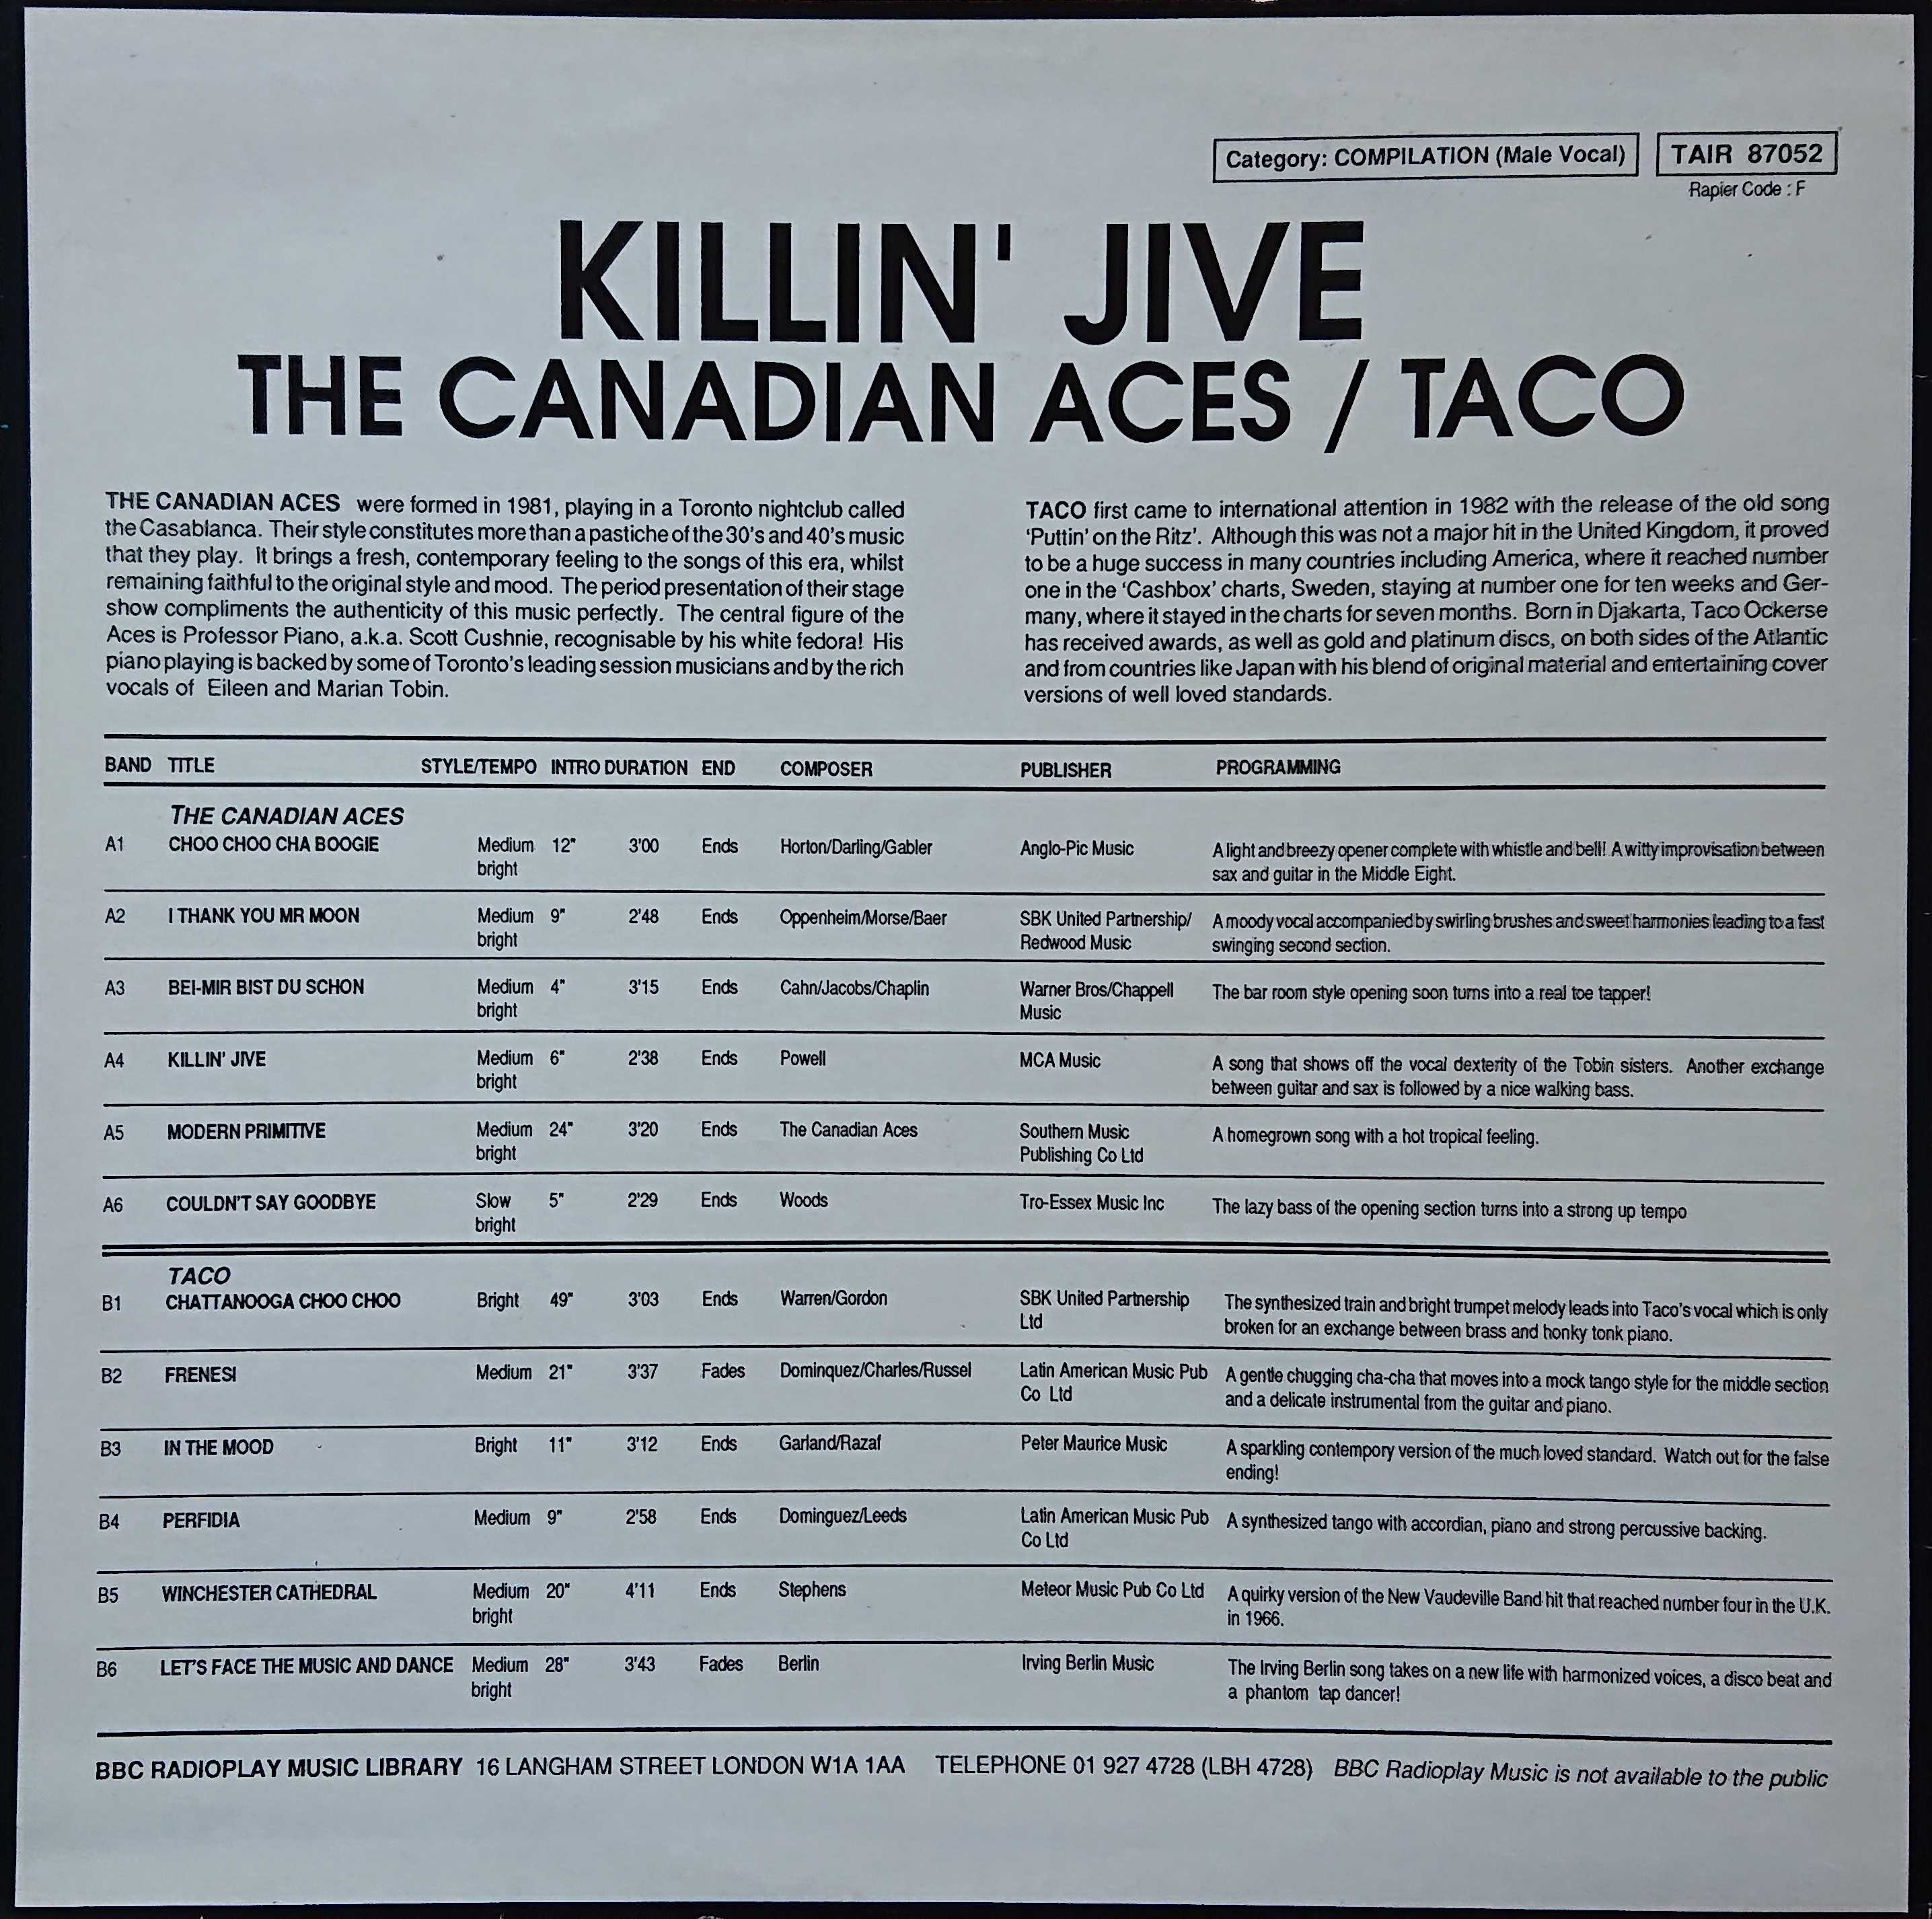 Picture of TAIR 87052 Killin' jive by artist The Canadian Aces from the BBC records and Tapes library